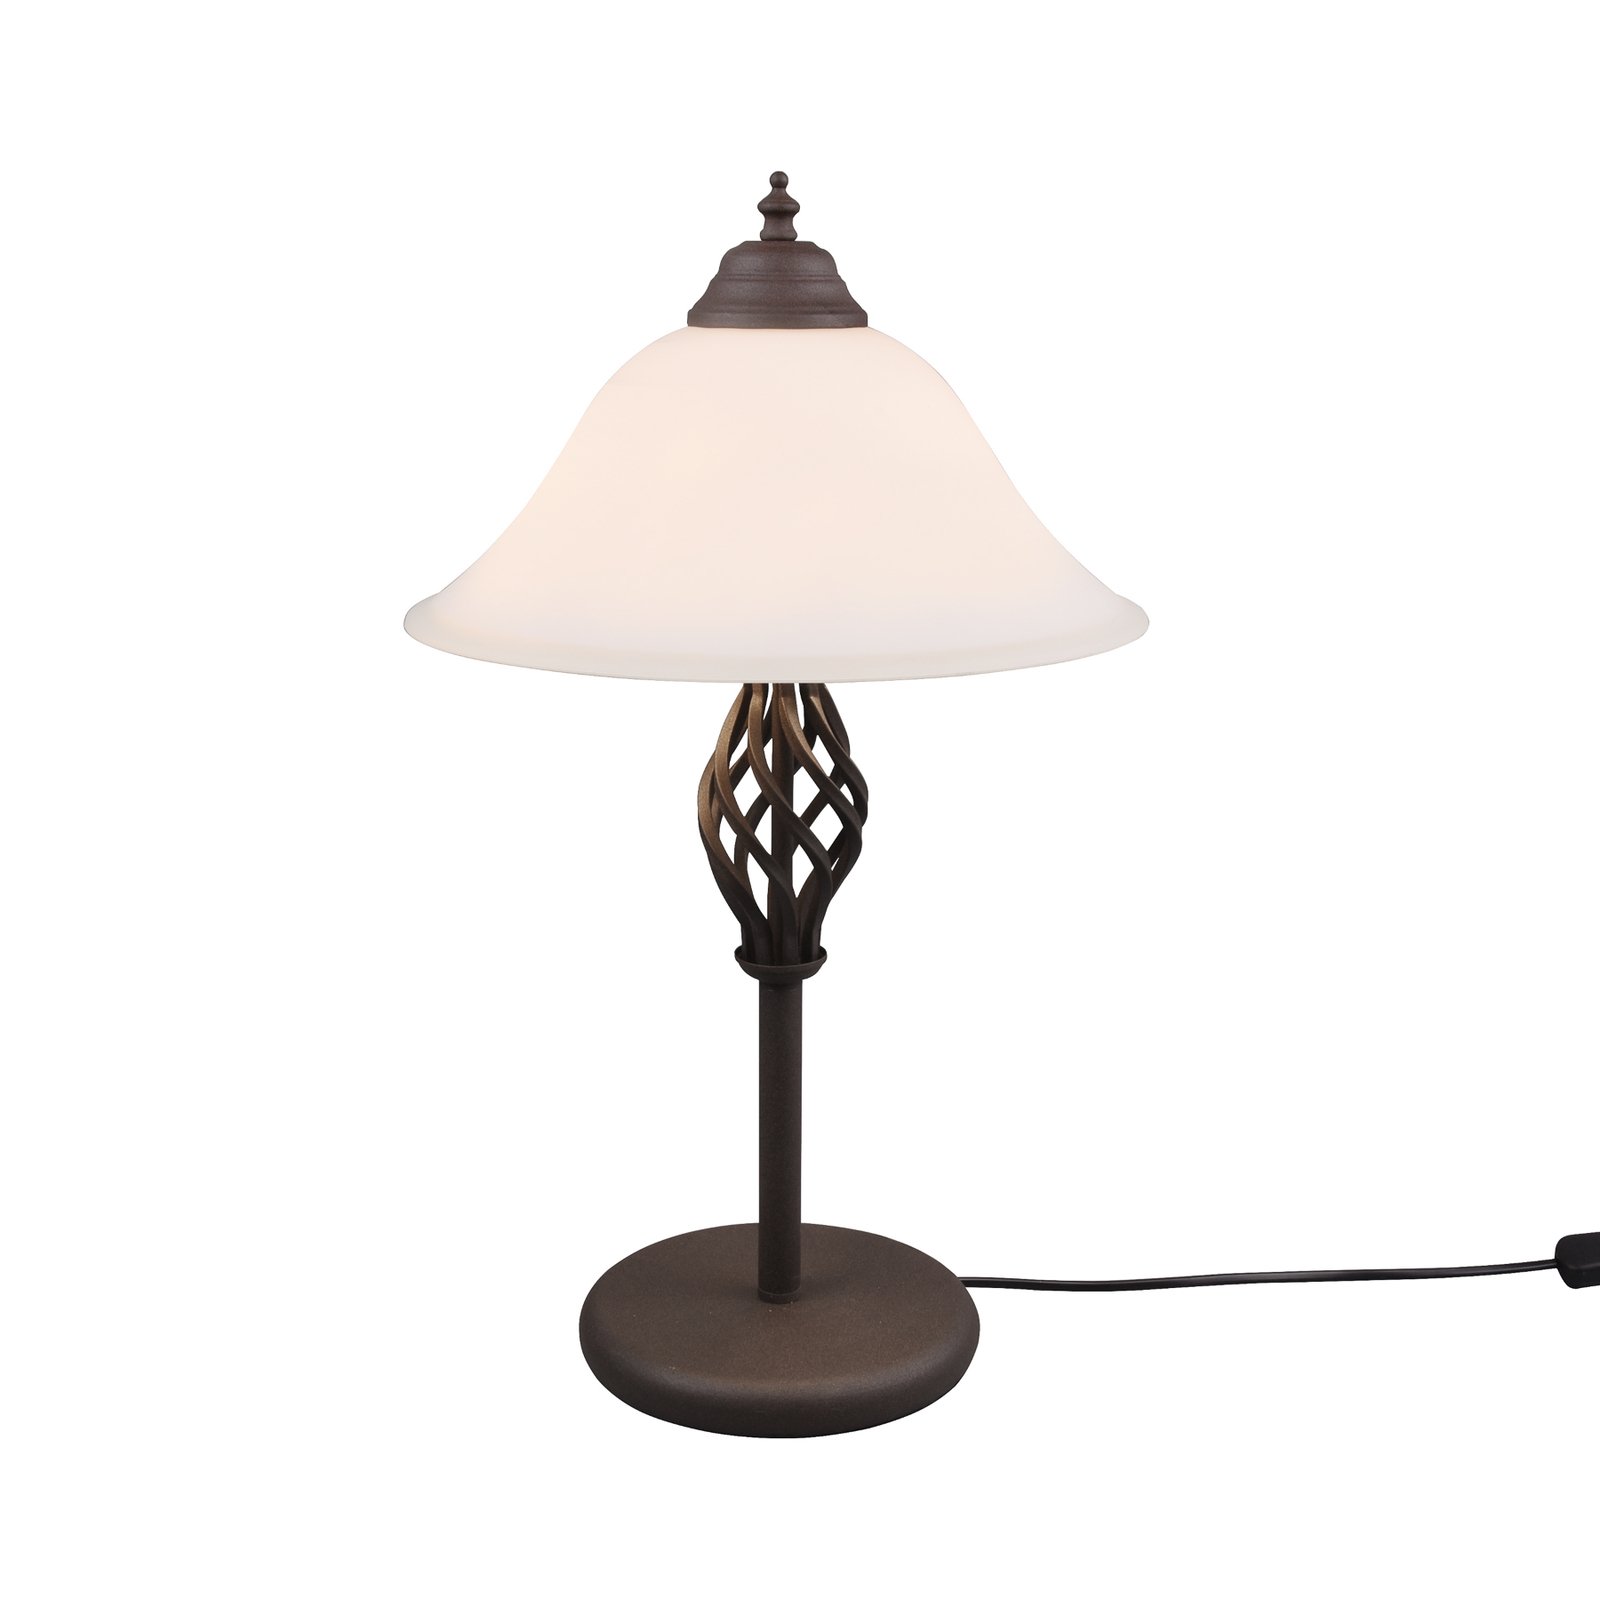 Rustica table lamp with cord switch, rust